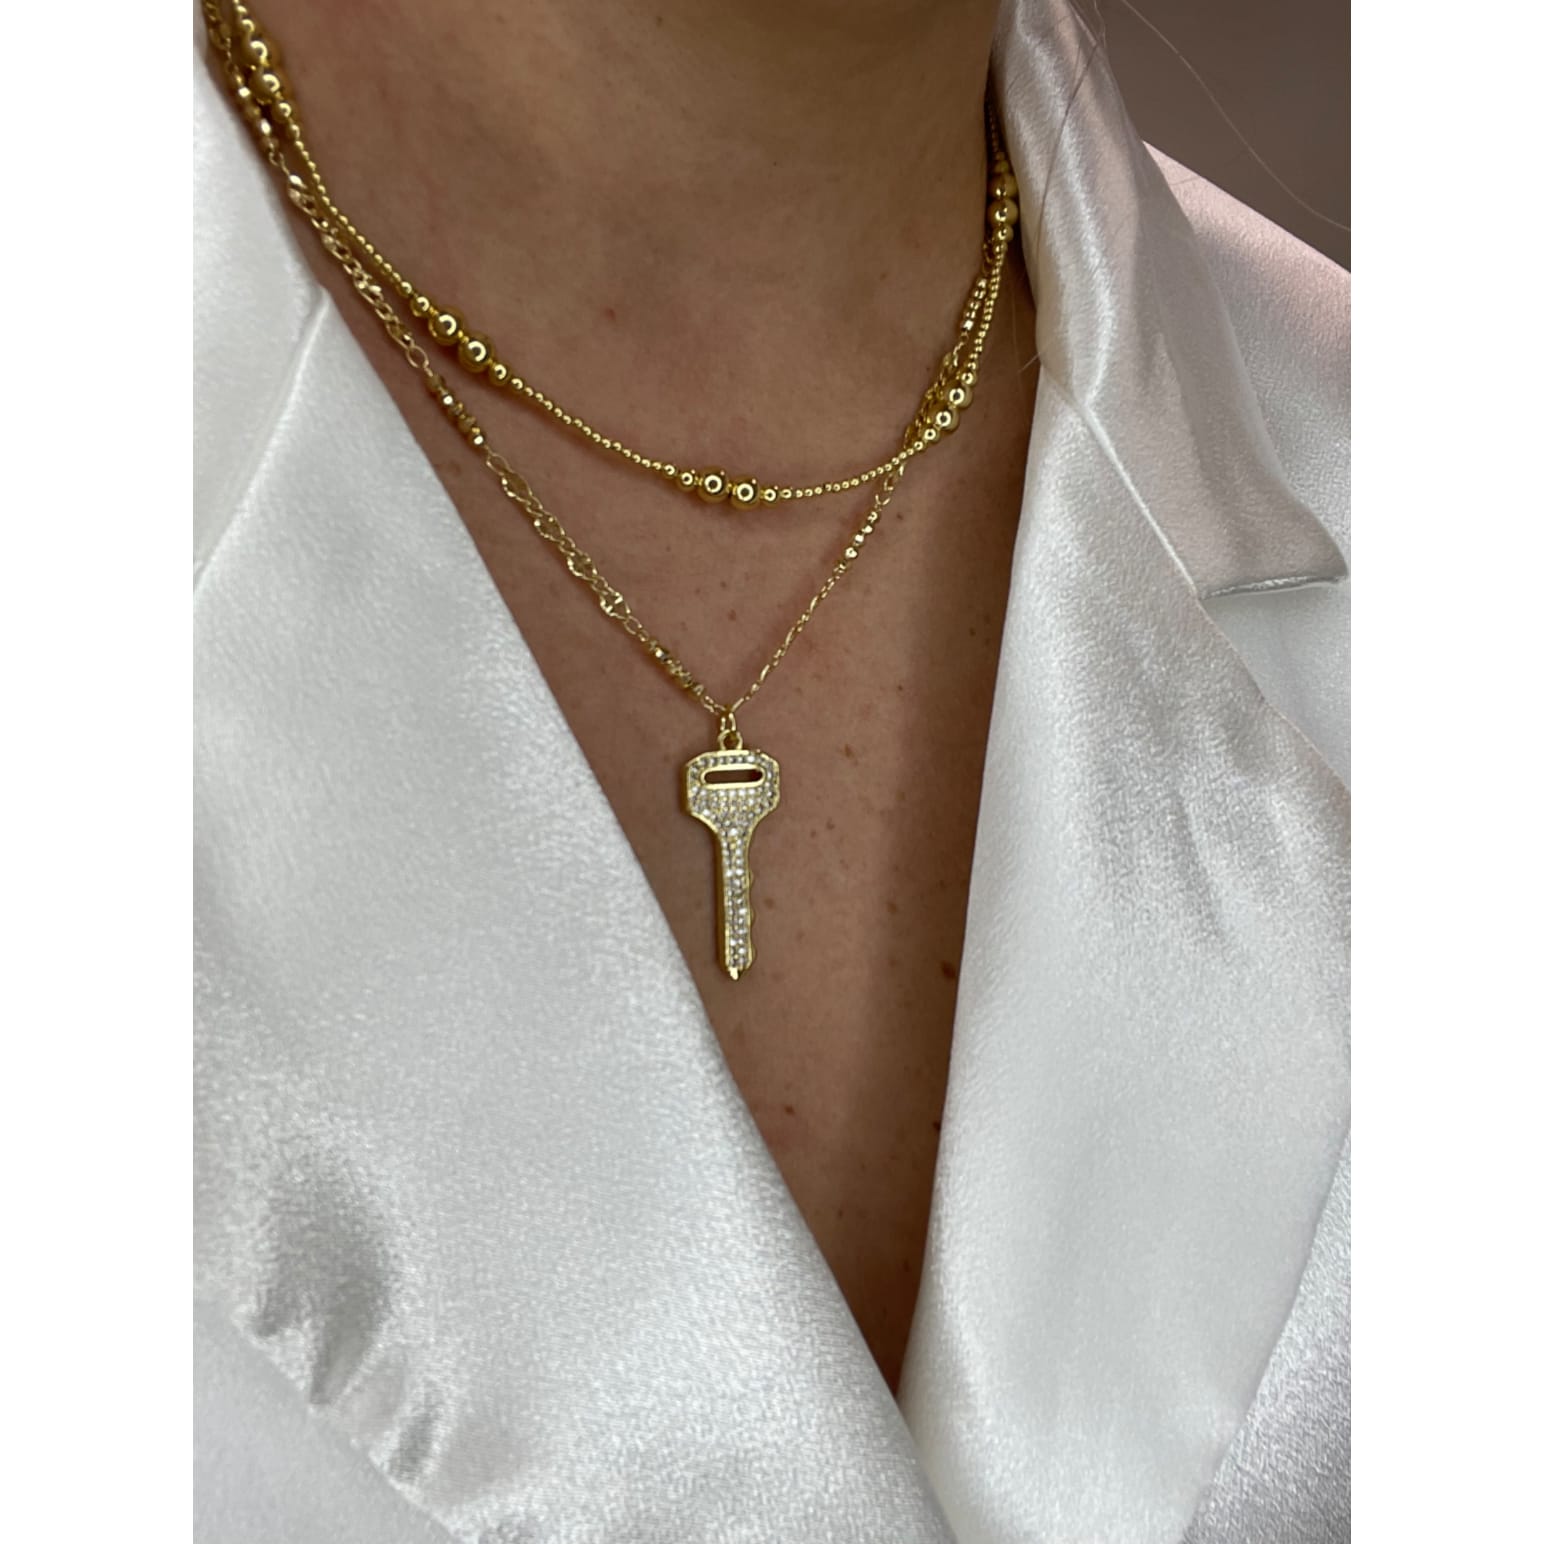 Square Key Necklace - Glam Vibes